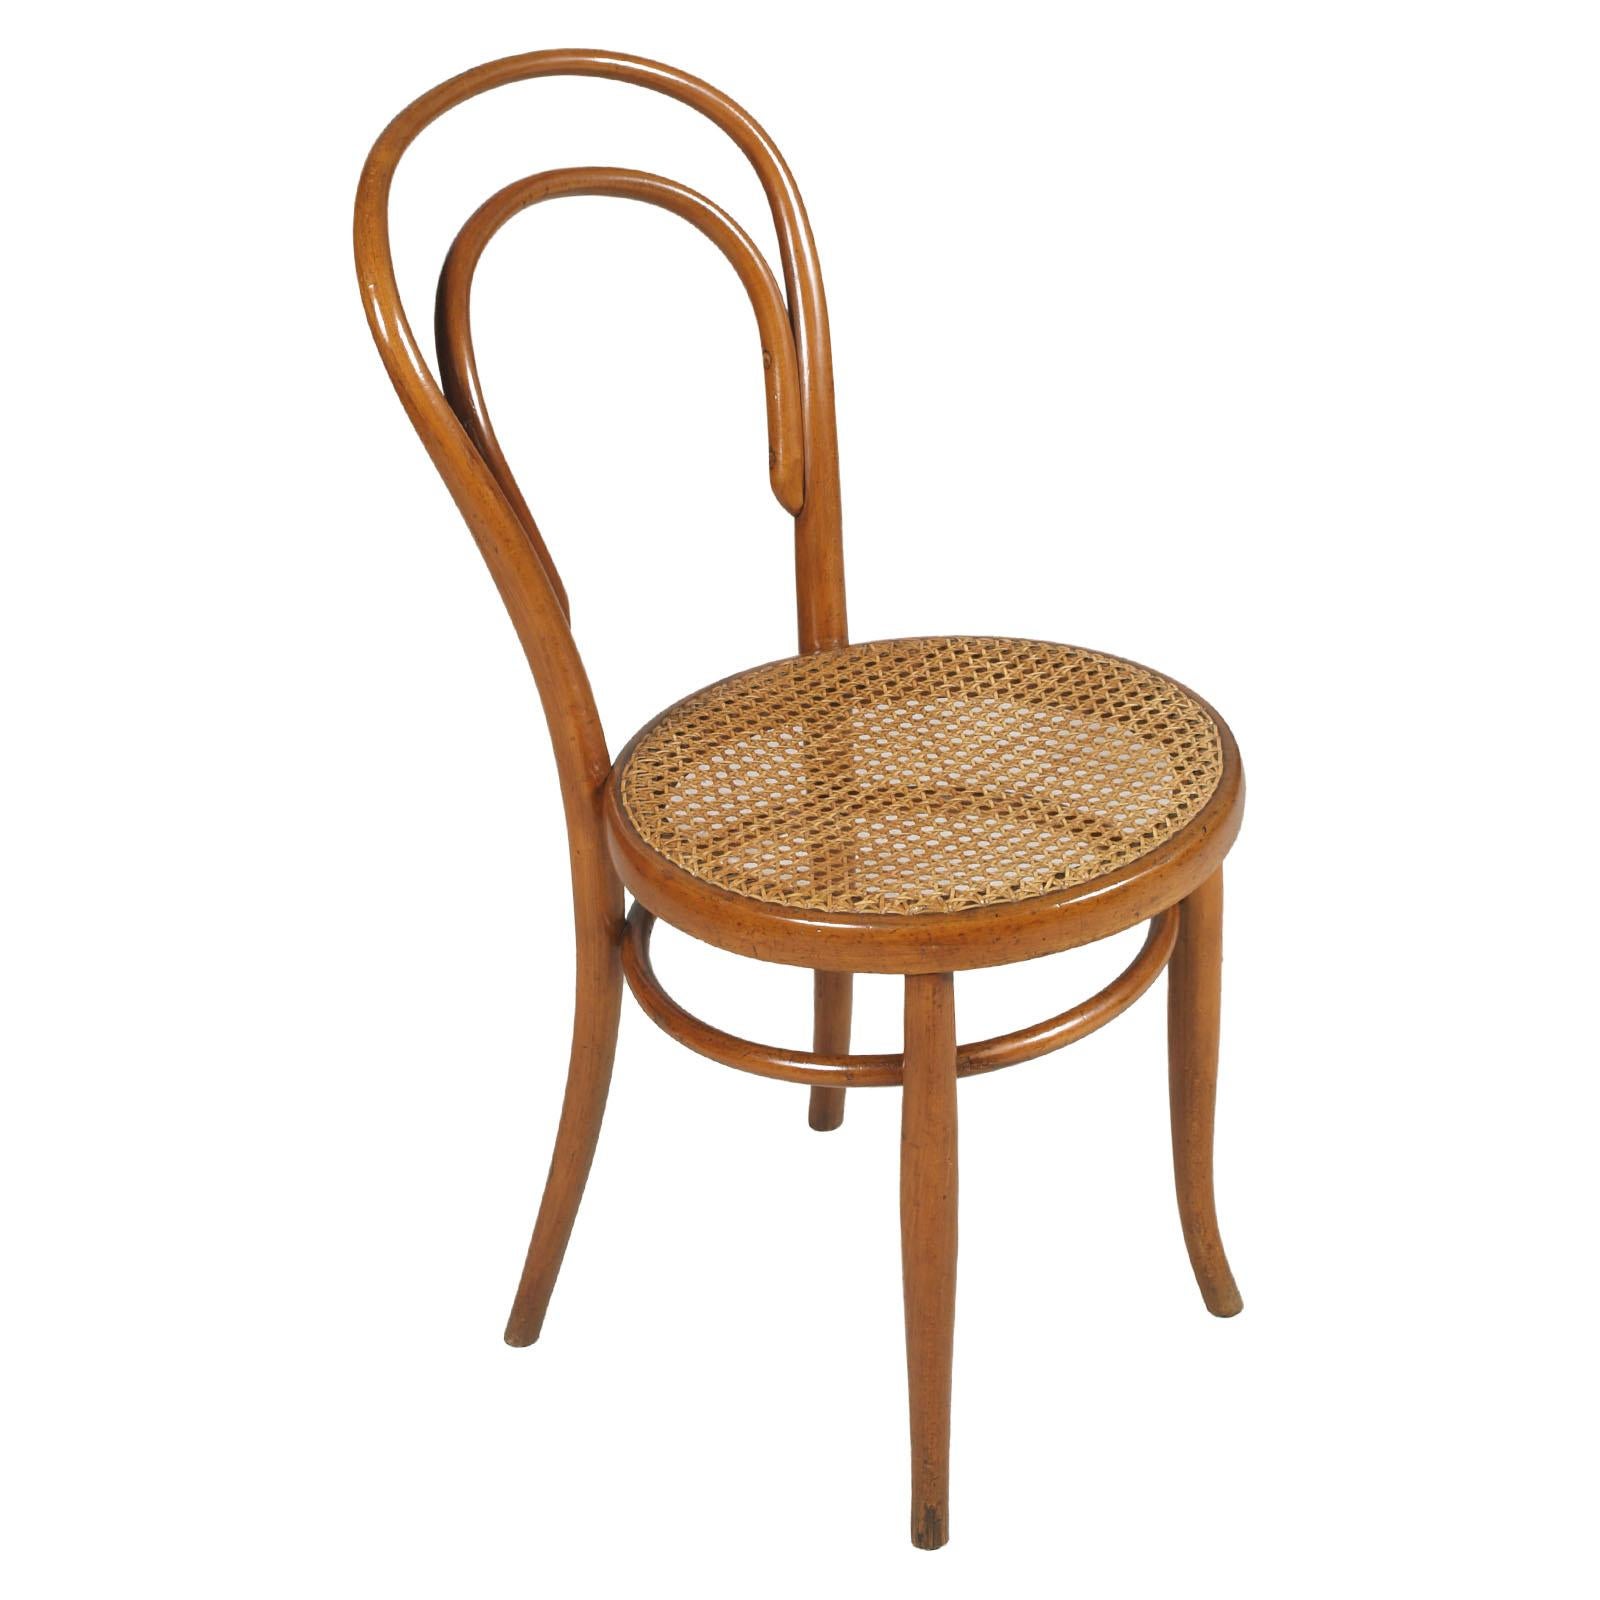 1930s set six chairs model 14 by Thonet, Vienna in bent beech, restored and wax polished
Measures cm: Height 47/92, diameter 42, D 54.